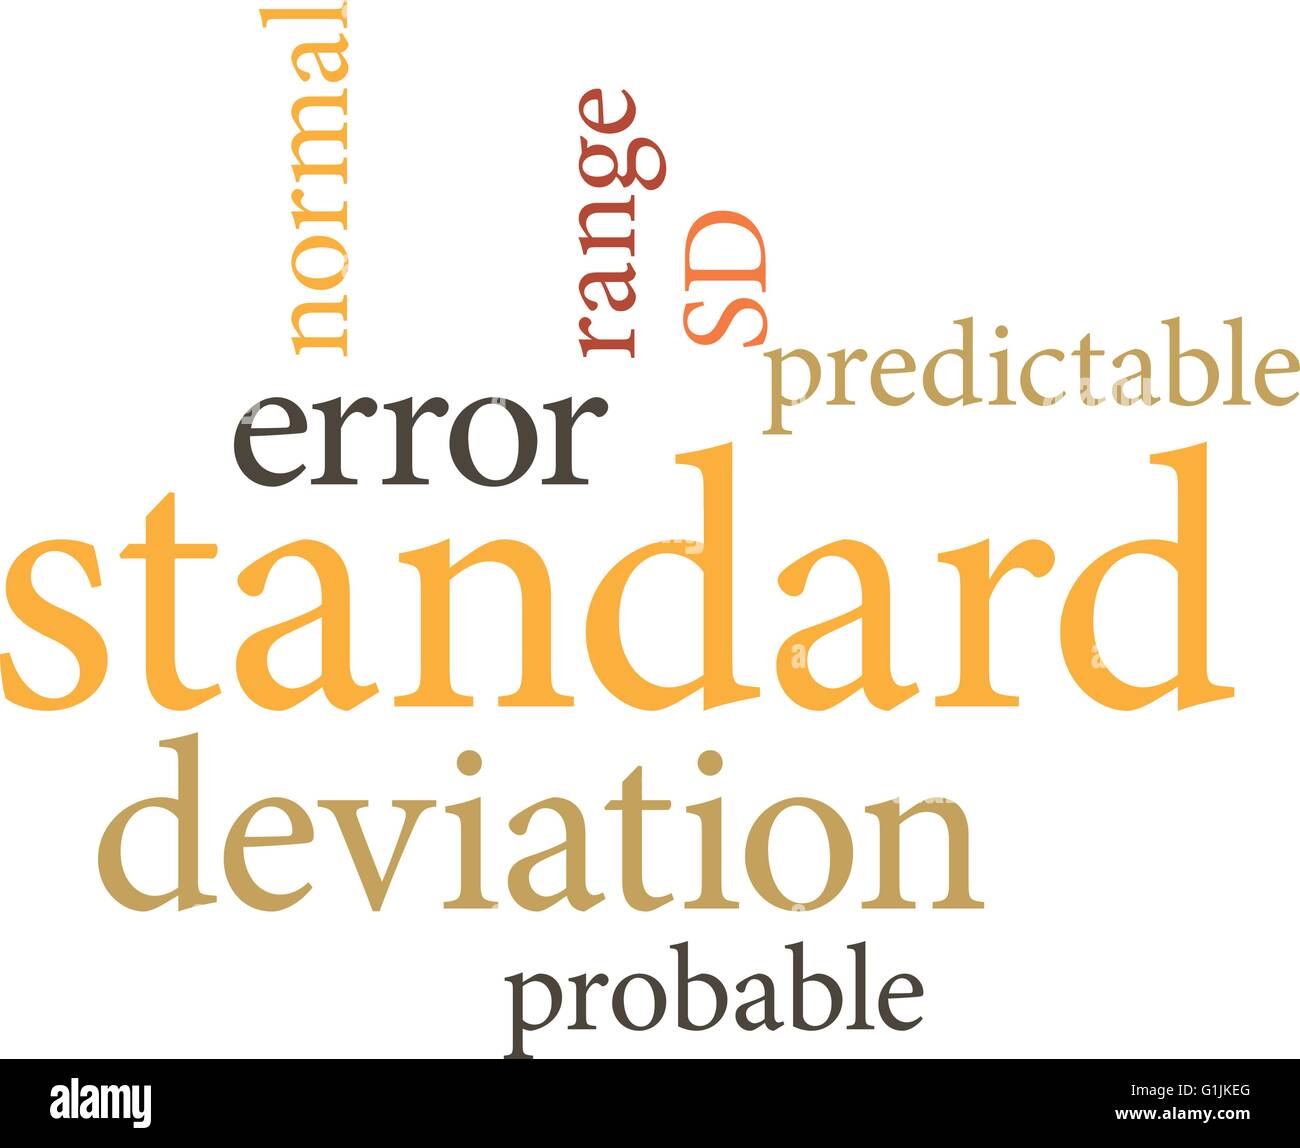 Illustration of the word standard deviation in word clouds isolated on white background Stock Vector